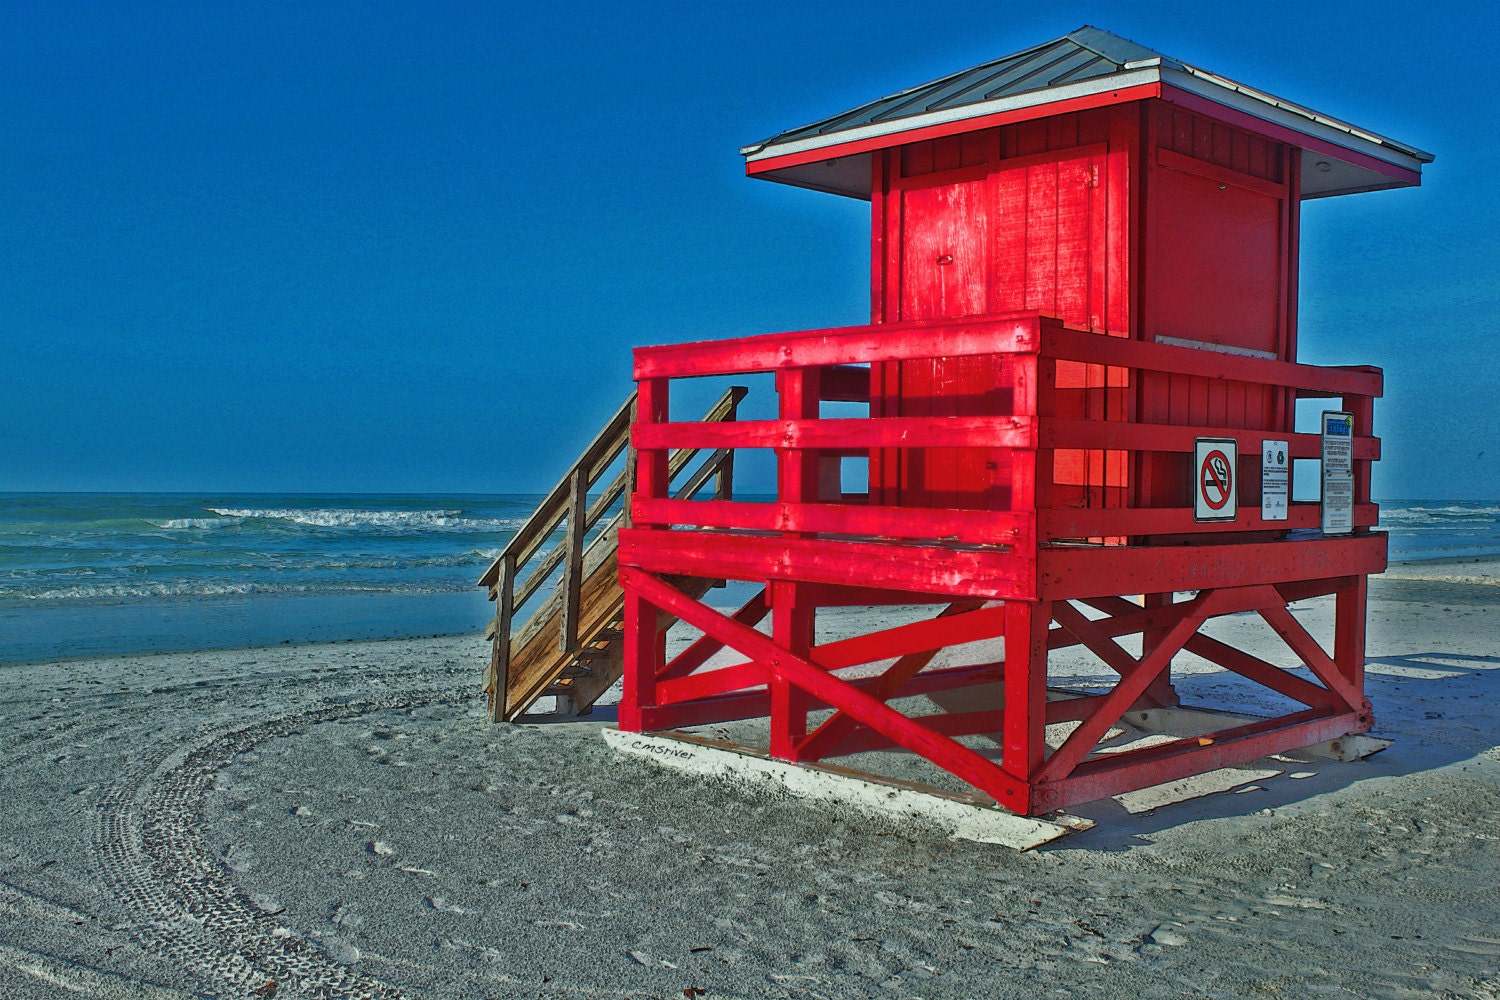 Siesta Key Red Life Guard Hut Photograph - cmsriverpictures